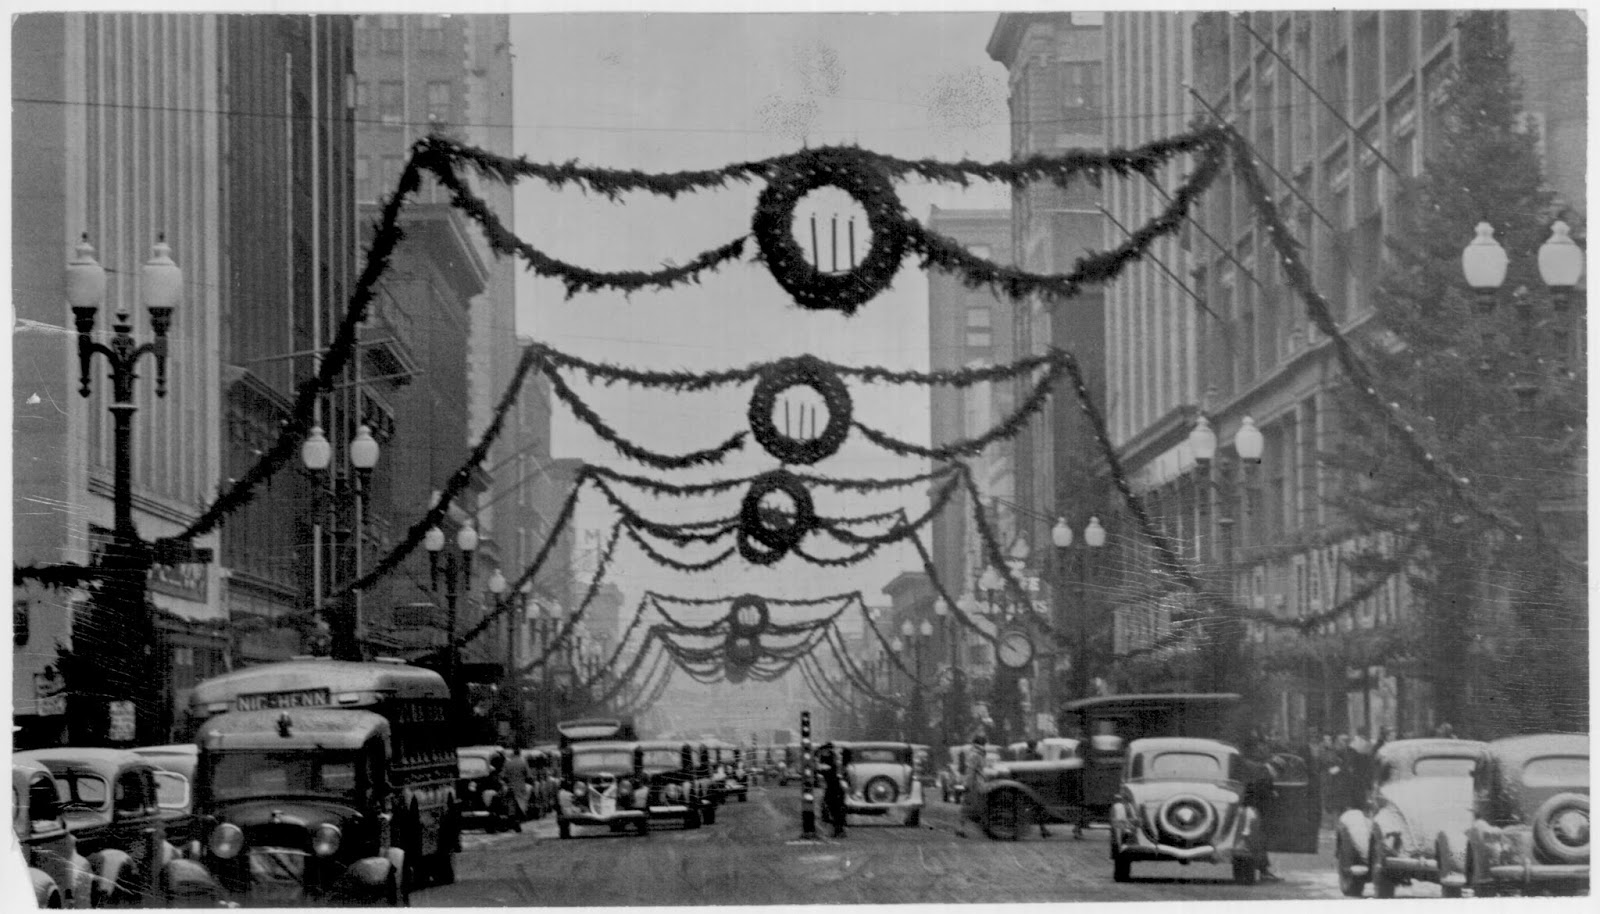 Some vintage Christmas pictures of downtown Minneapolis: – Hubert White